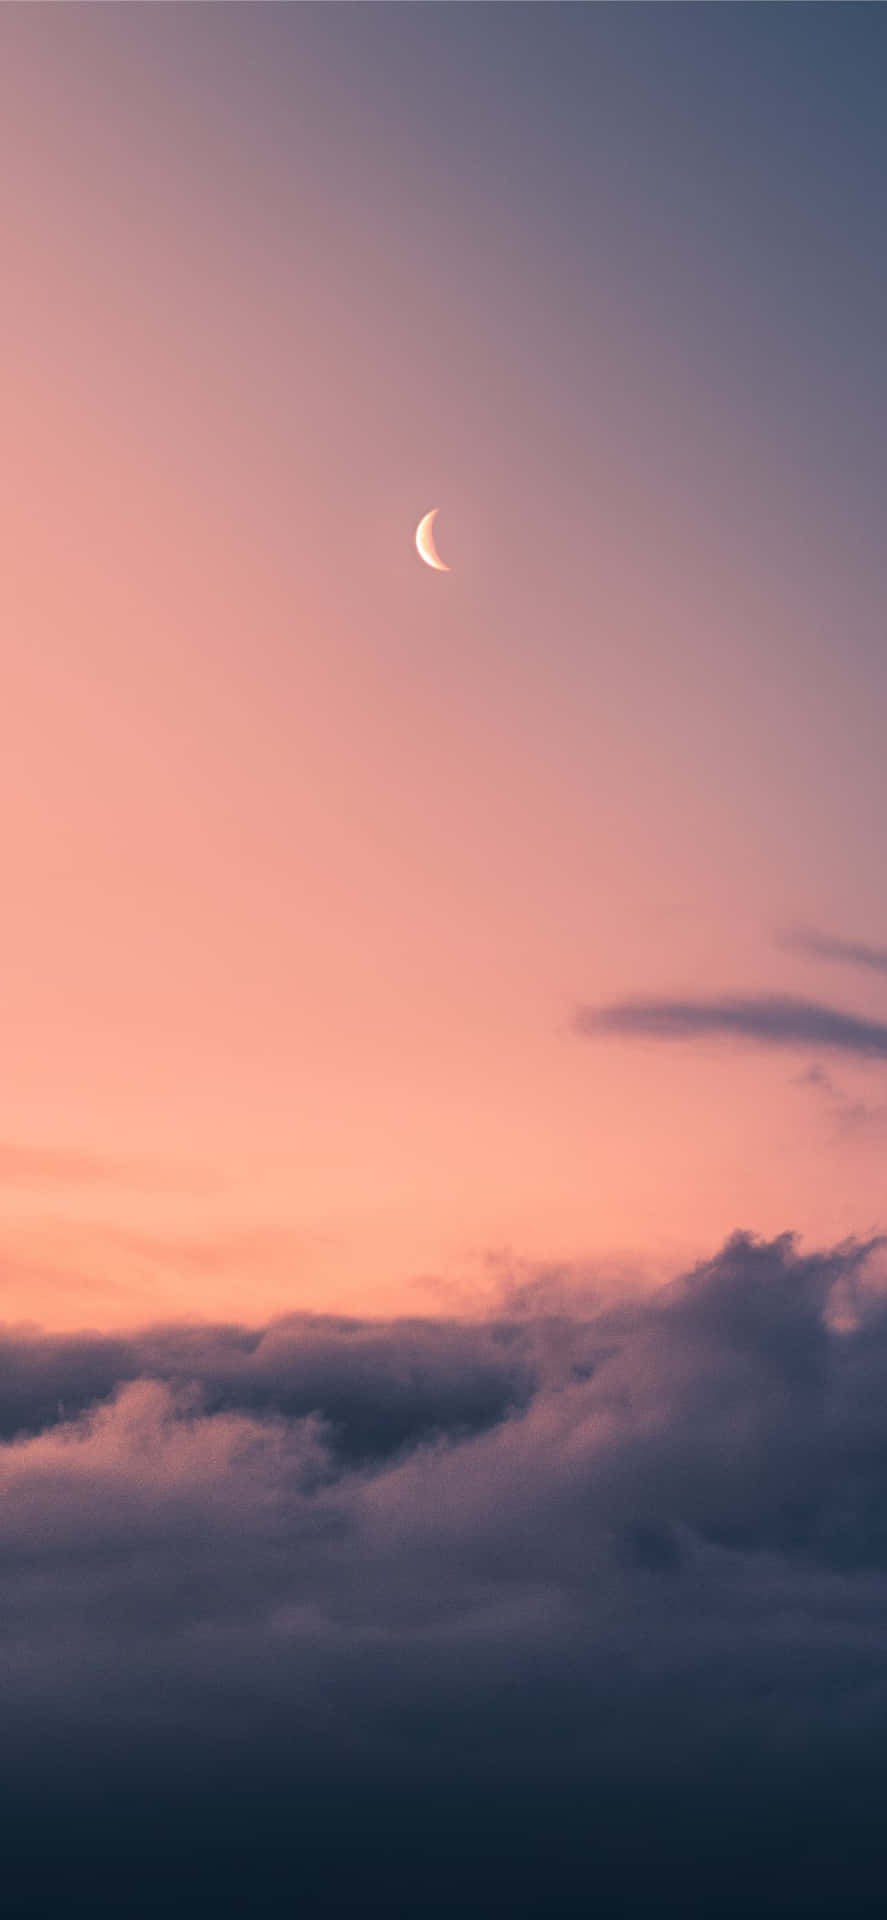 Sunset Cloud And Moon Wallpaper